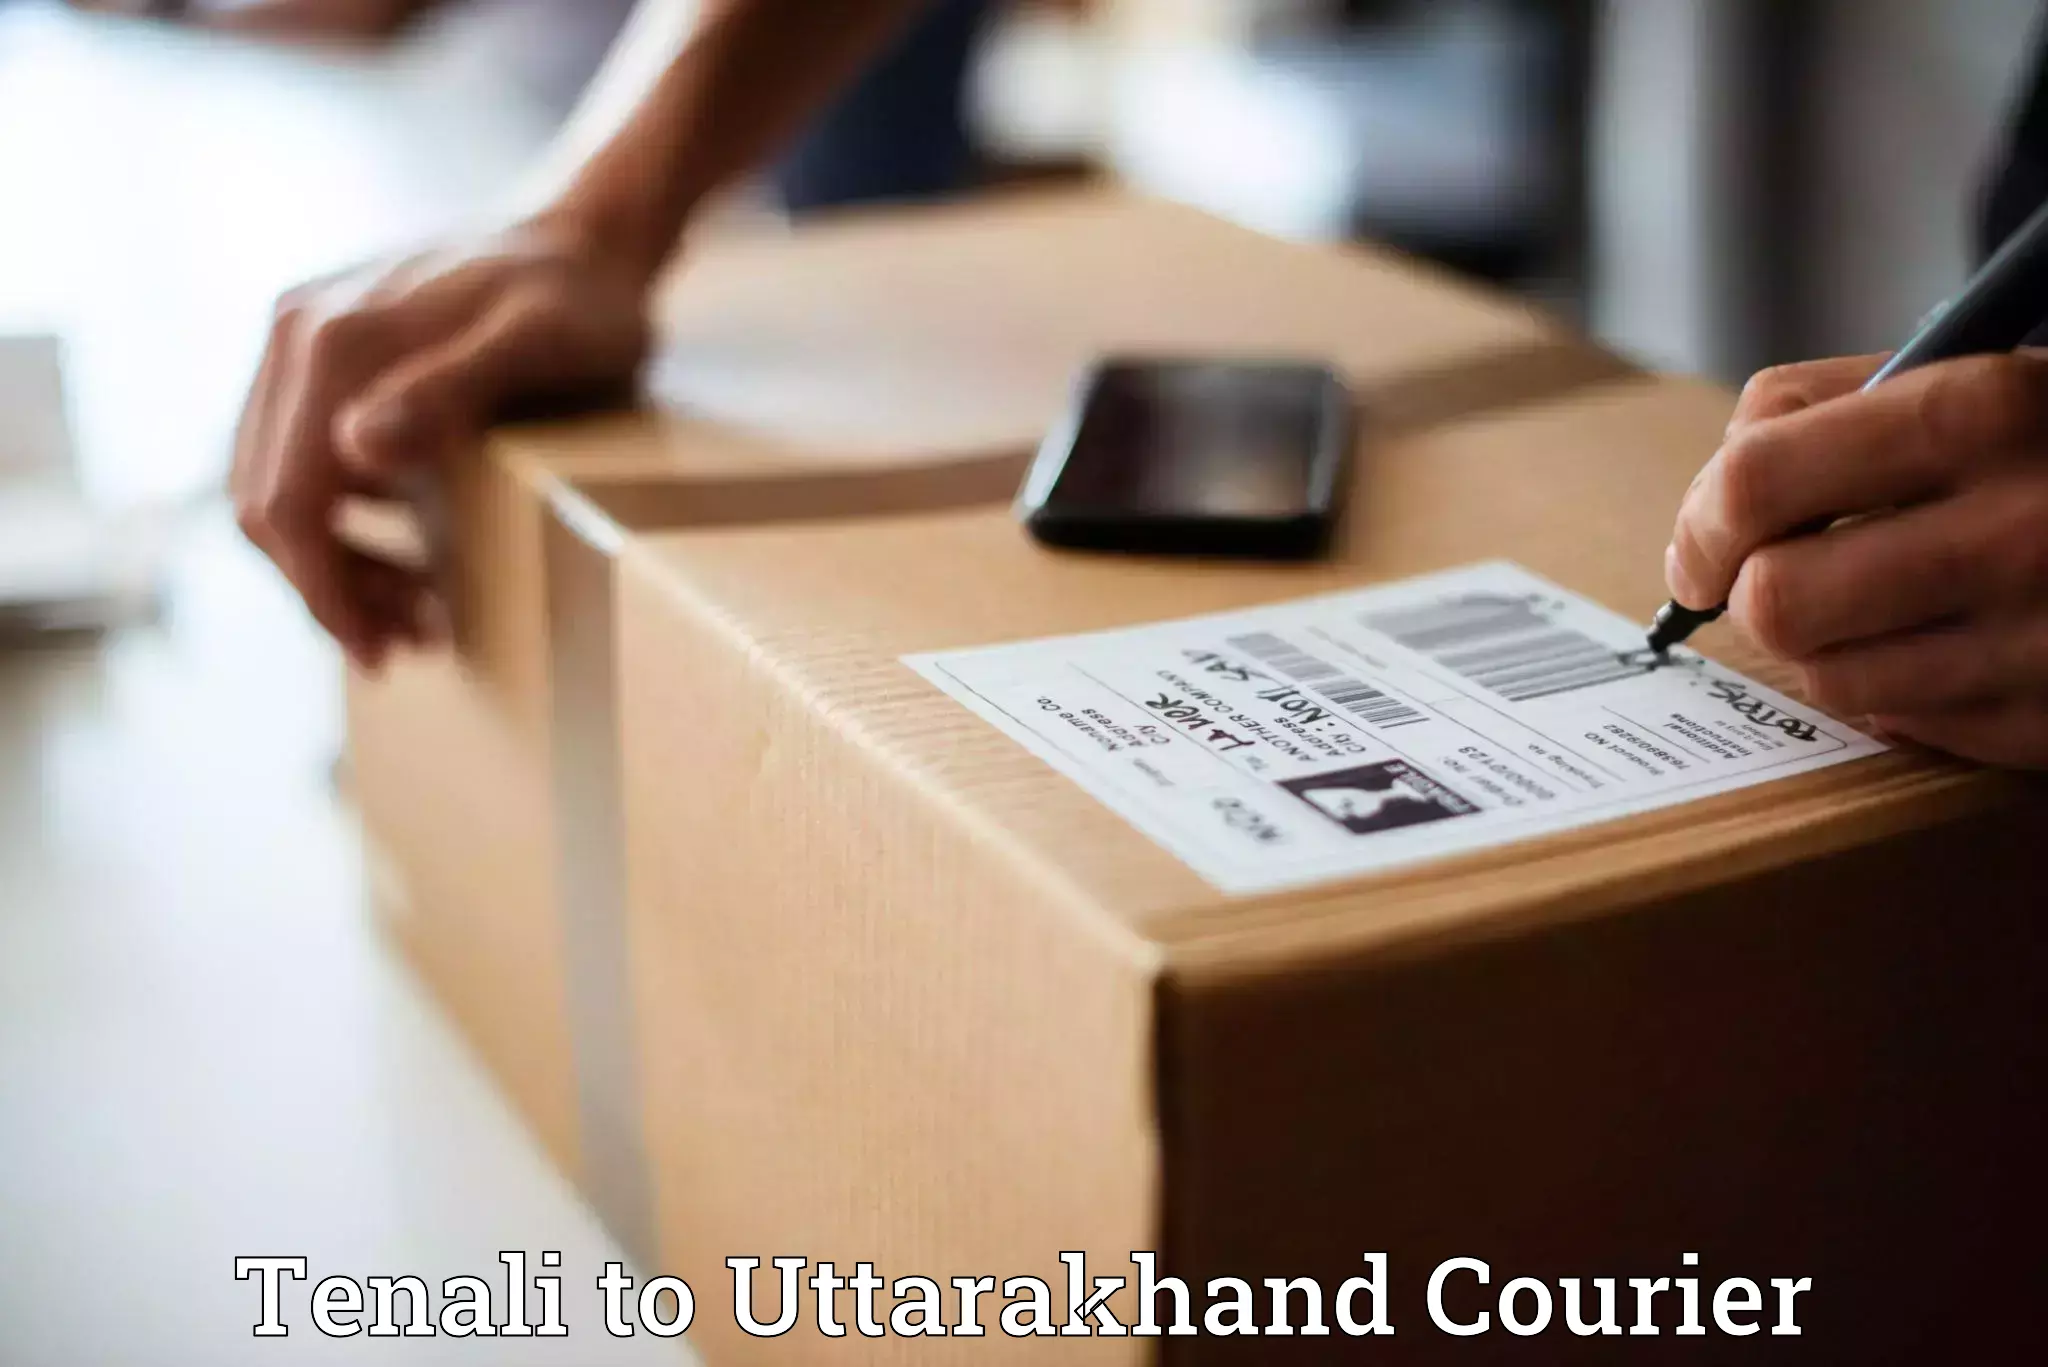 Efficient package consolidation Tenali to Uttarakhand